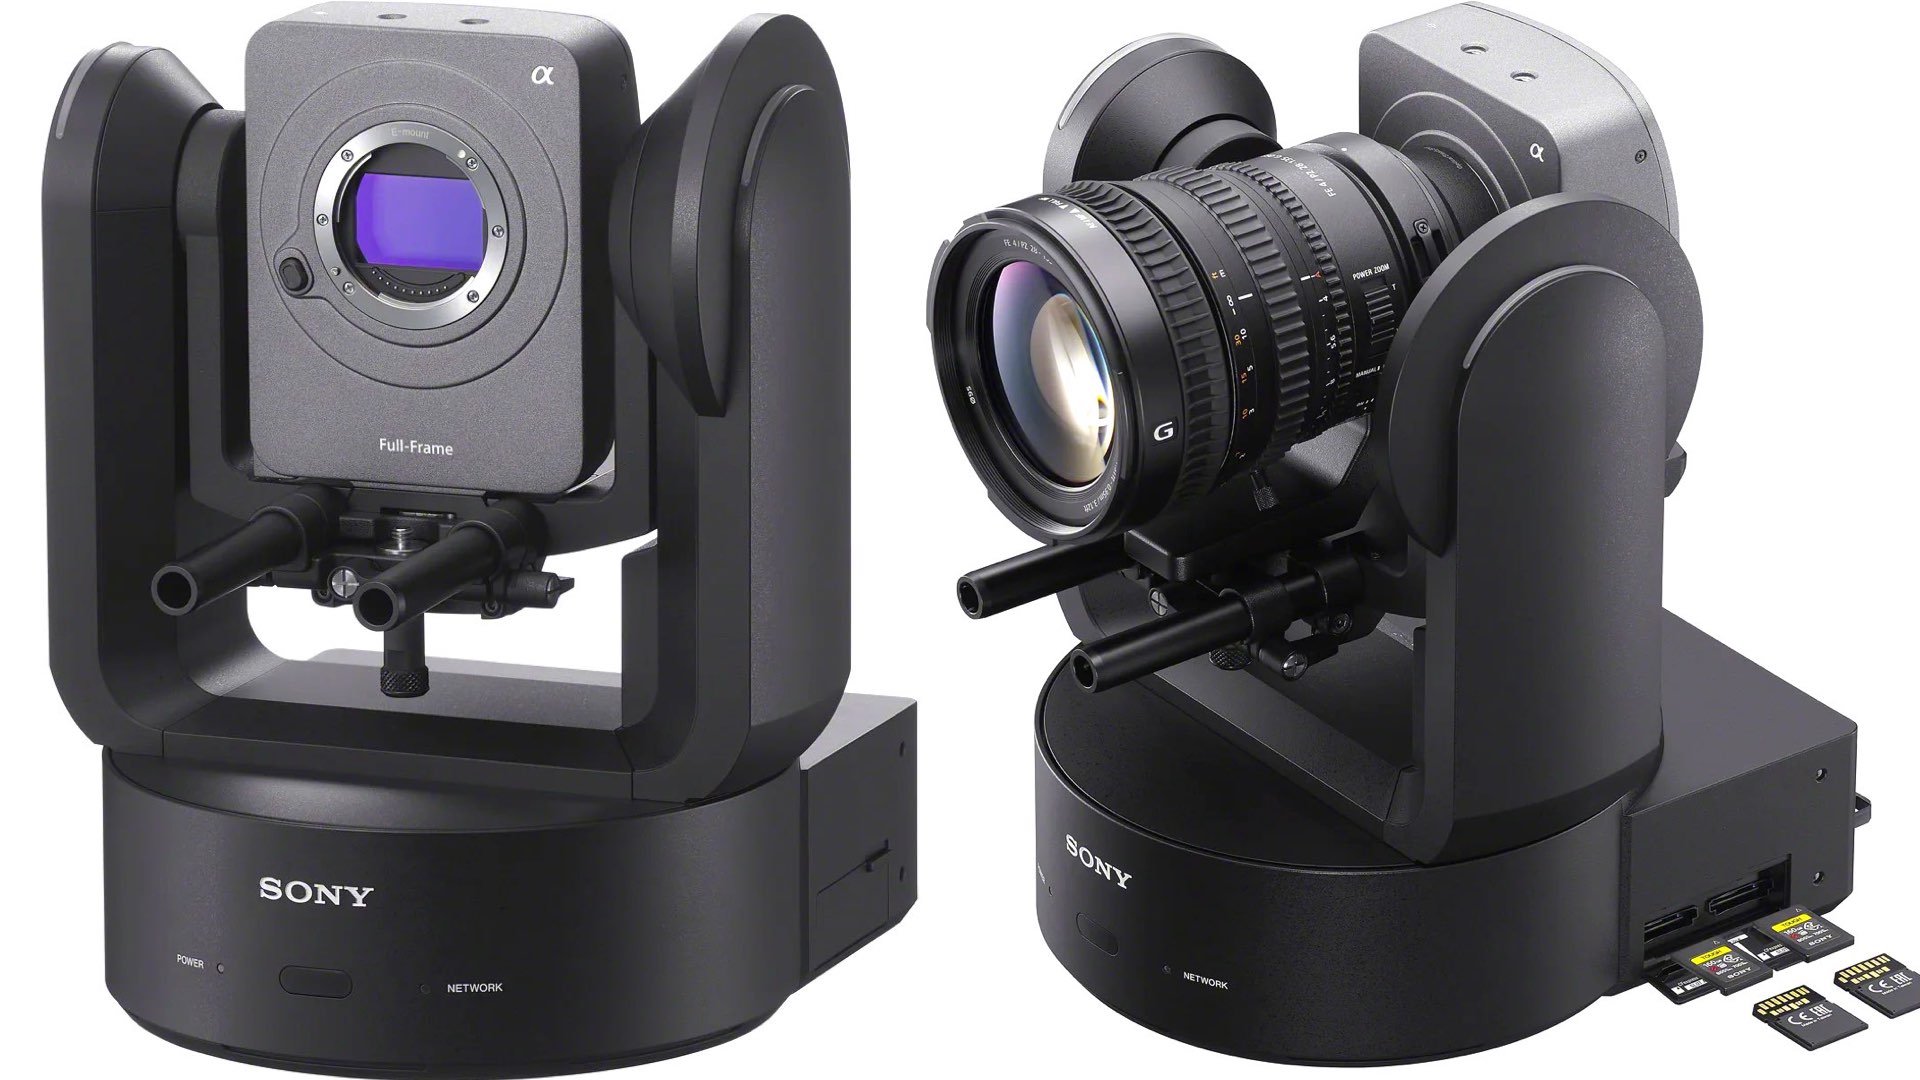 Sony Launches FR7 and Initiates a New Era of Cinema PTZ Cameras